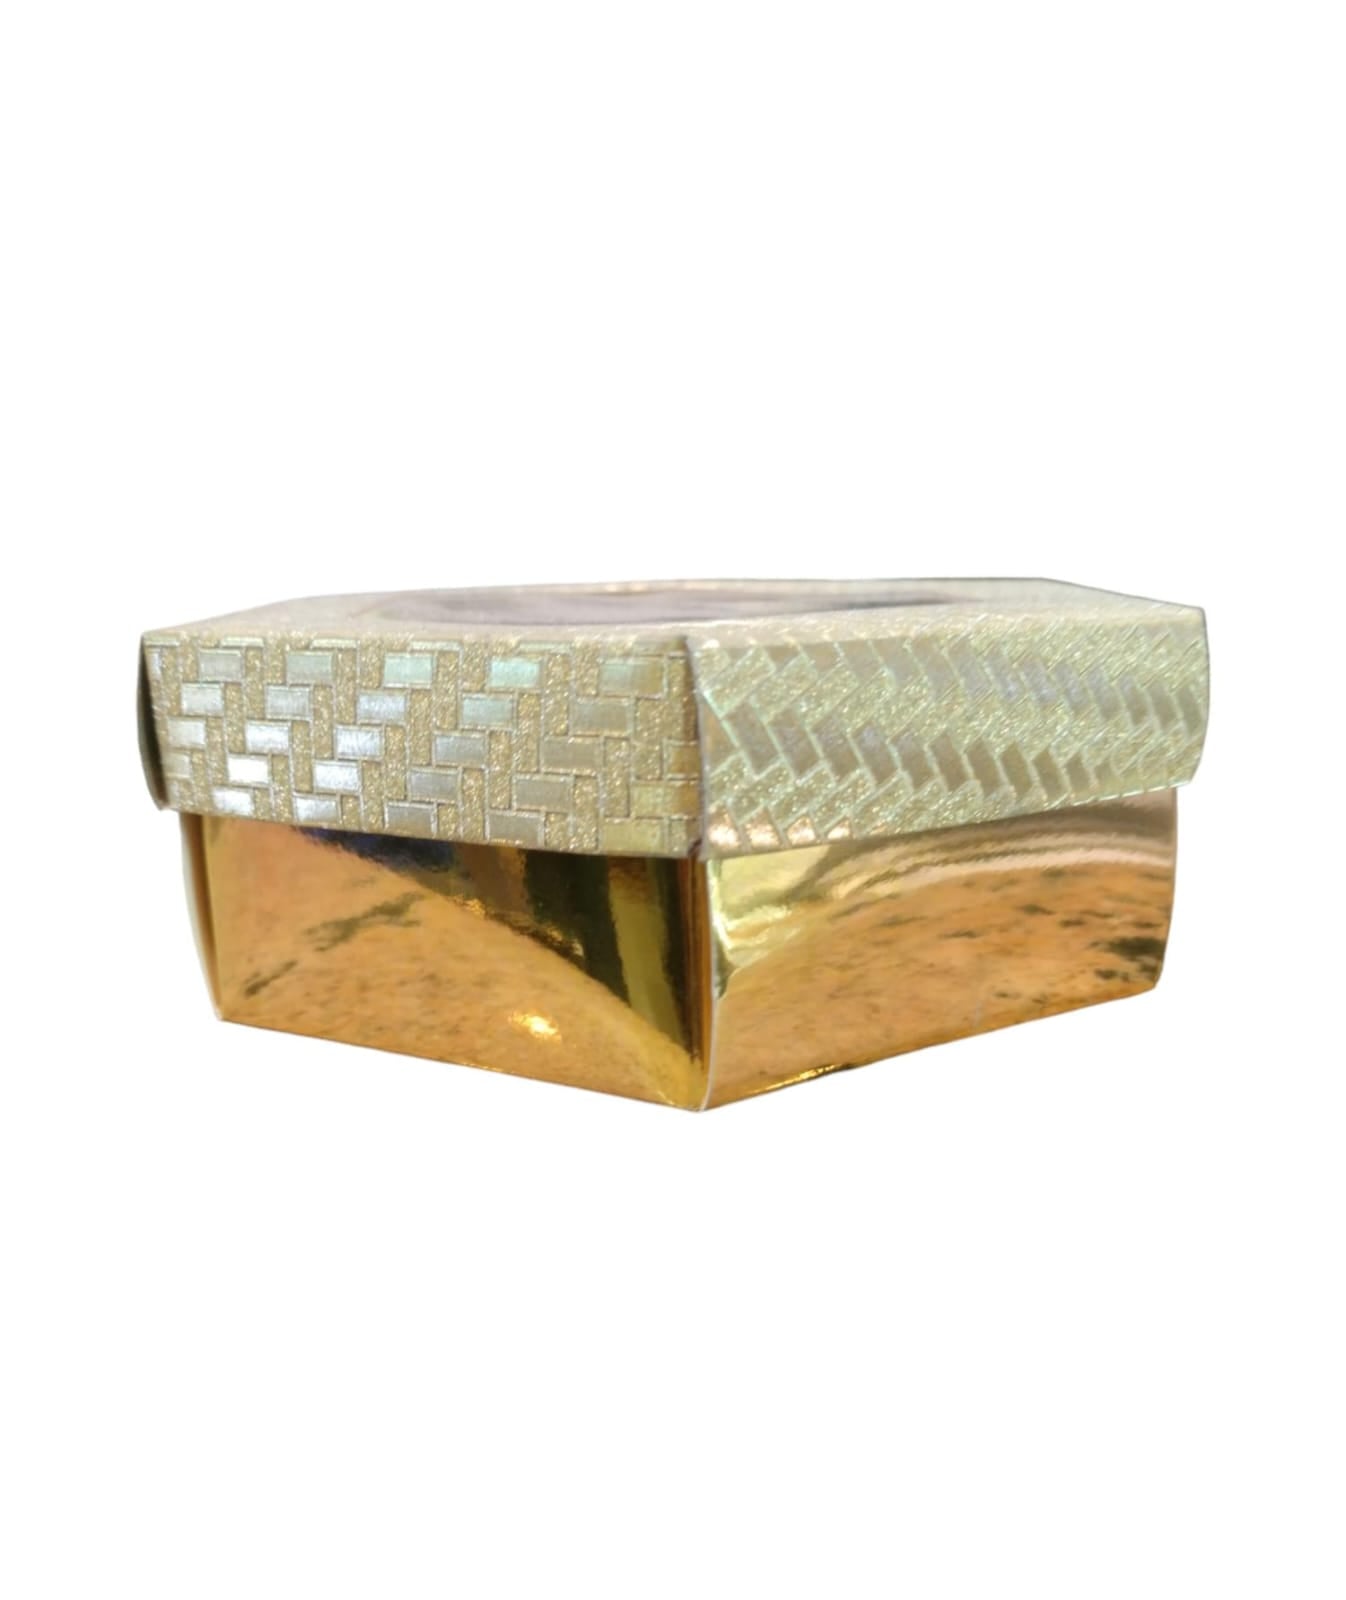 Gift Biscuit Paper Box Gold Decal 300g Square 12x12x4.5cm XPP251